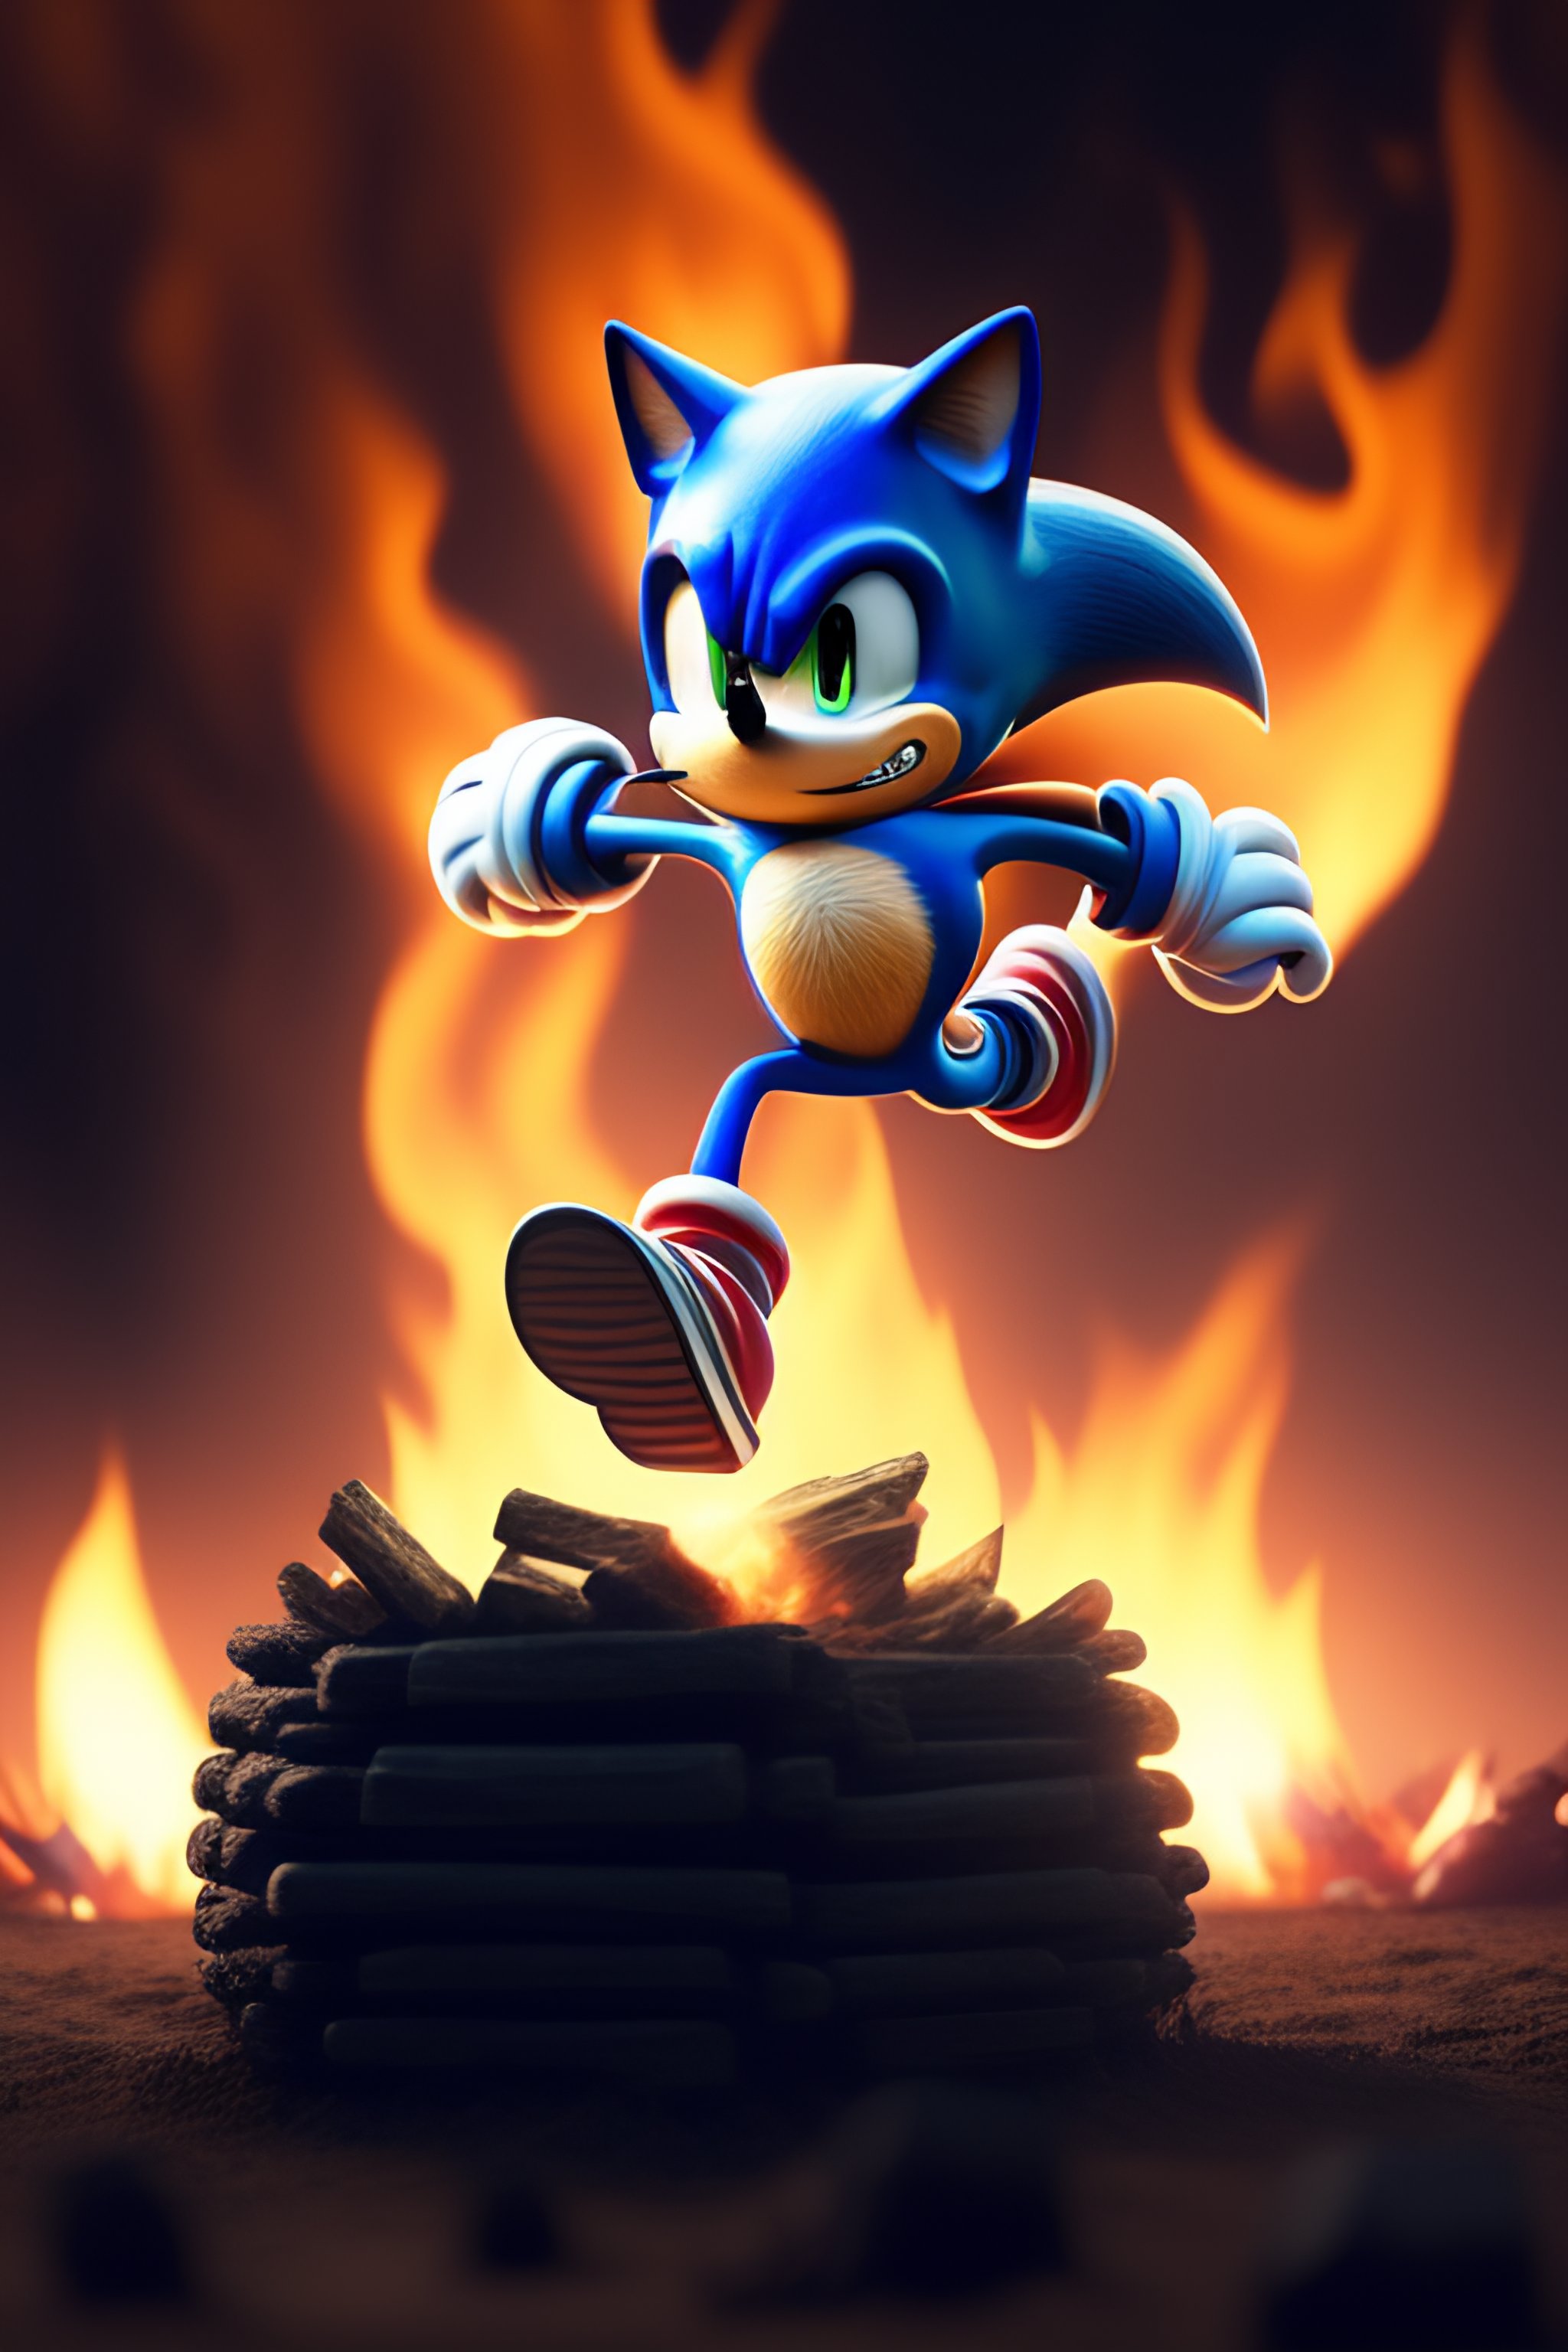 CapCut_sonic running for his life from a fire